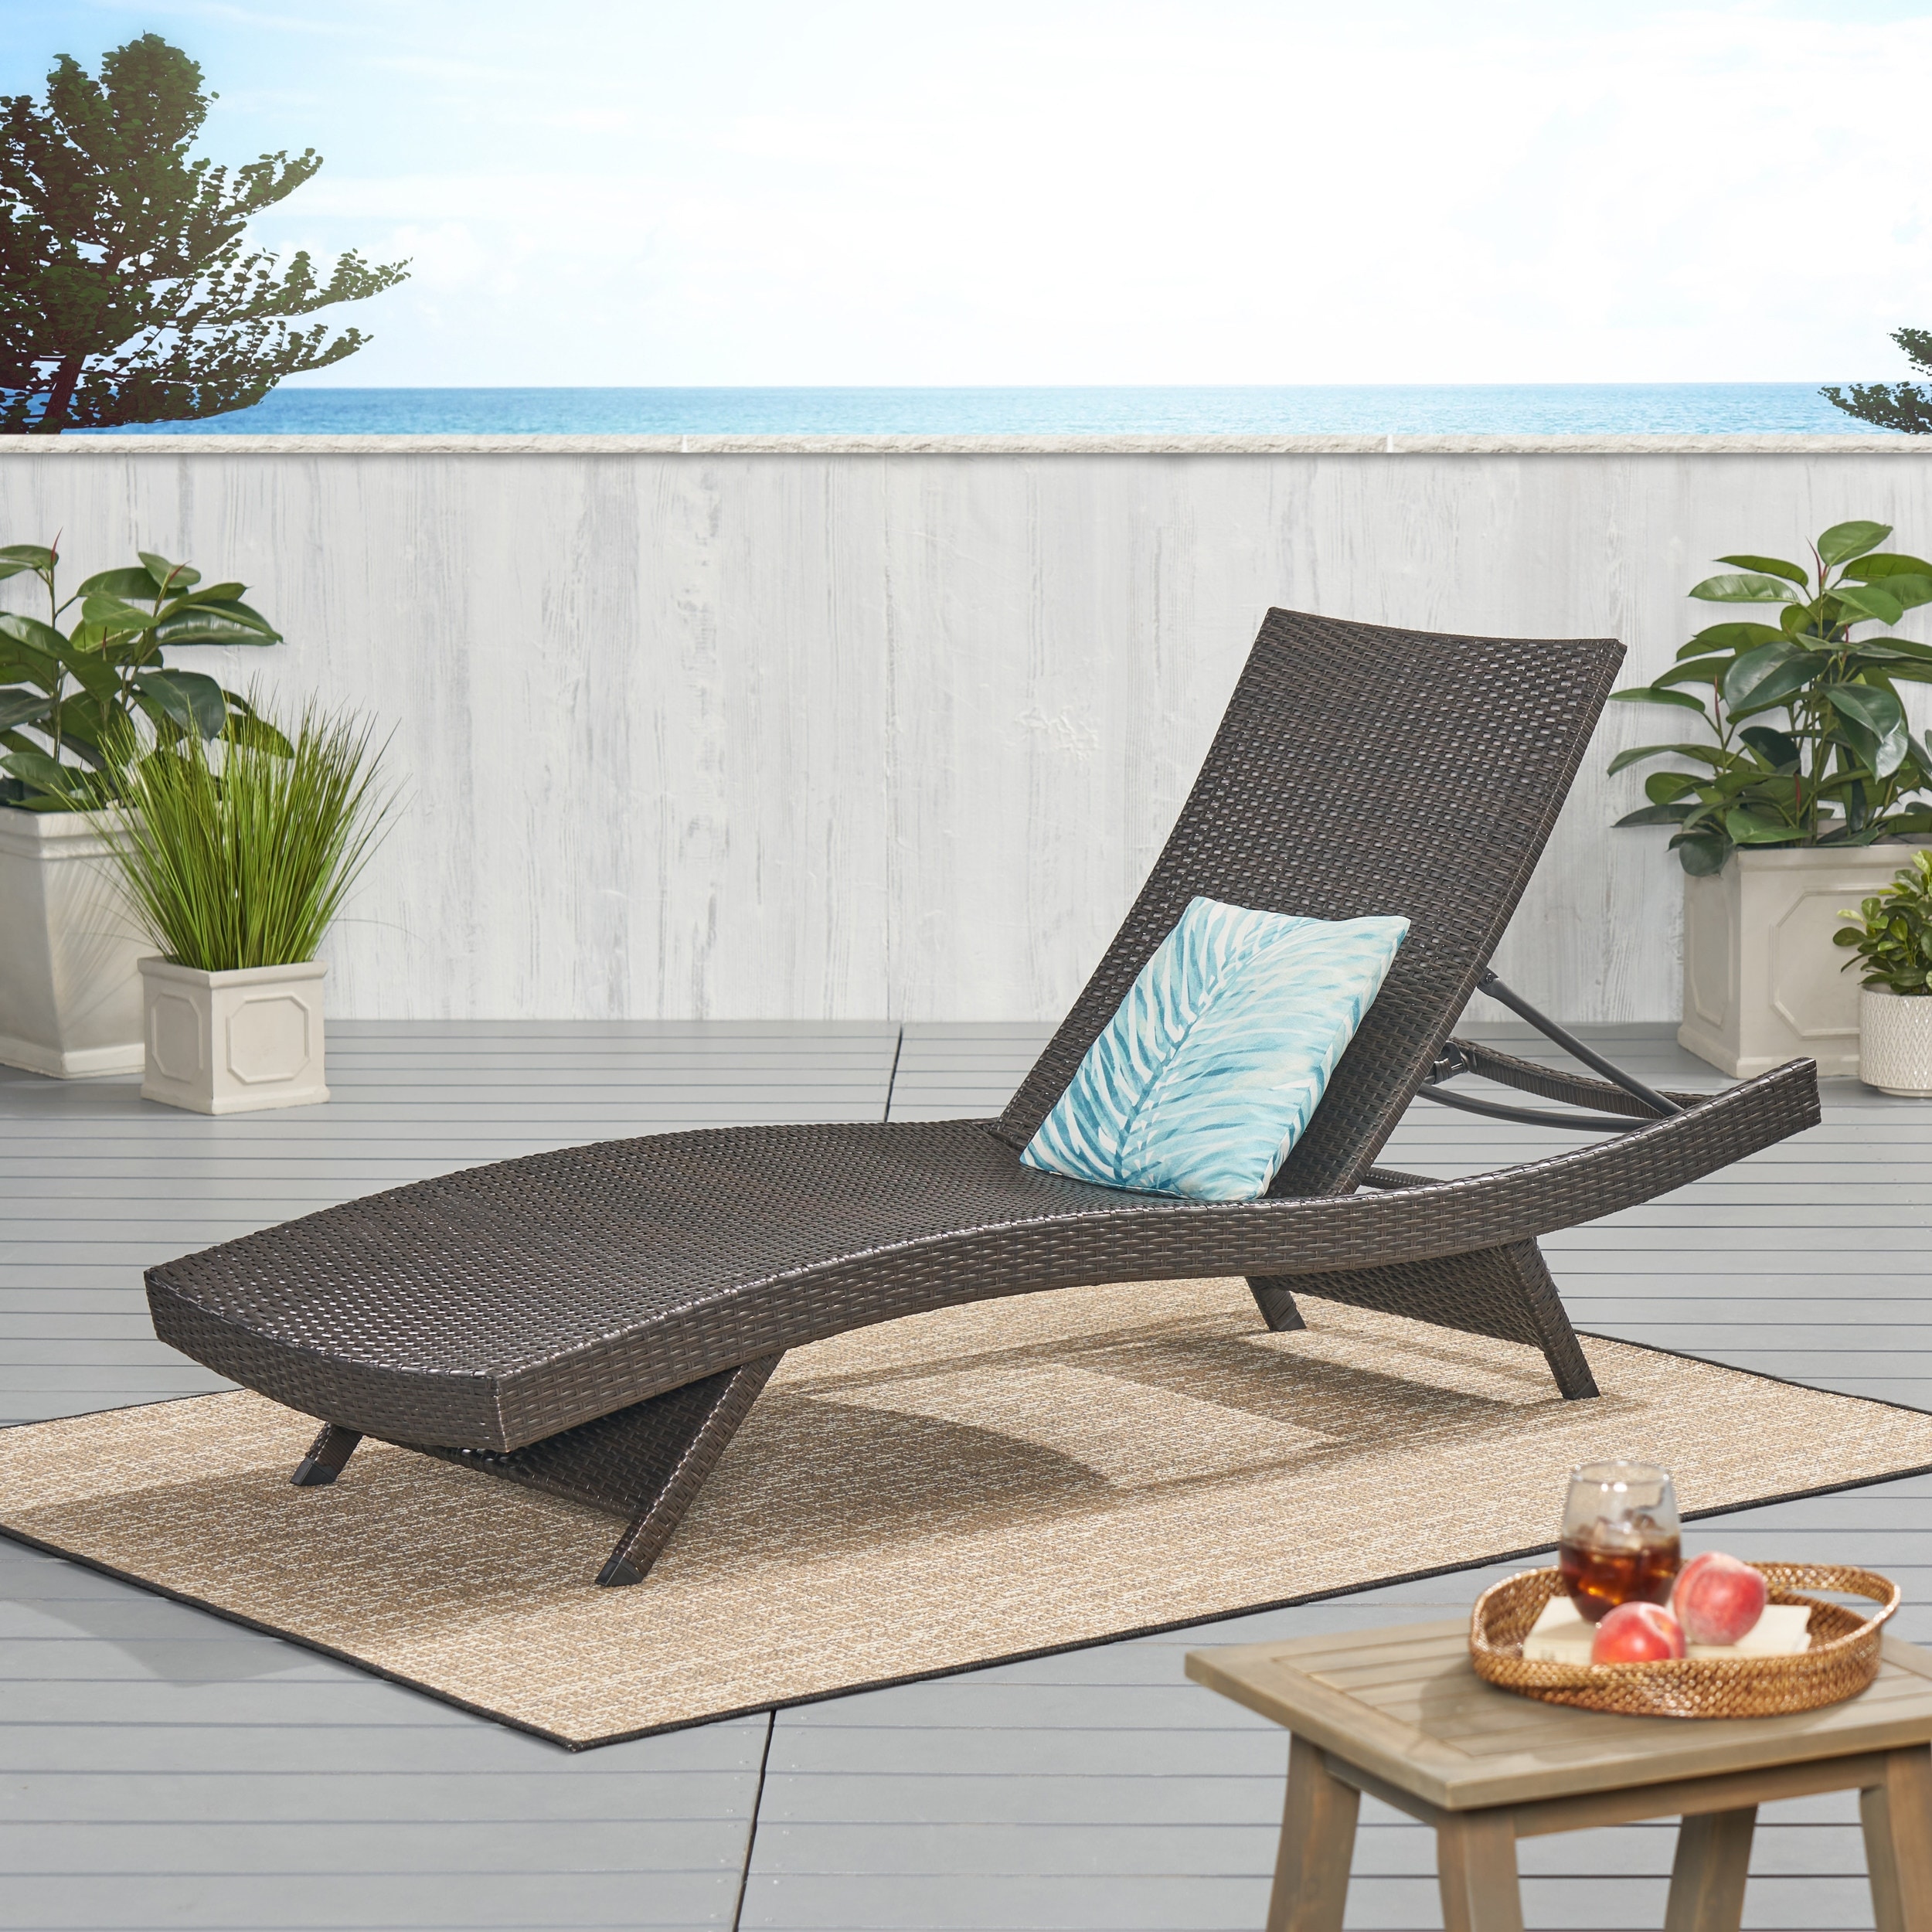 Christopher Knight Home Salem Outdoor Grey Wicker Chaise Lounge Chair  by  Brown No Cover - image 2 of 5